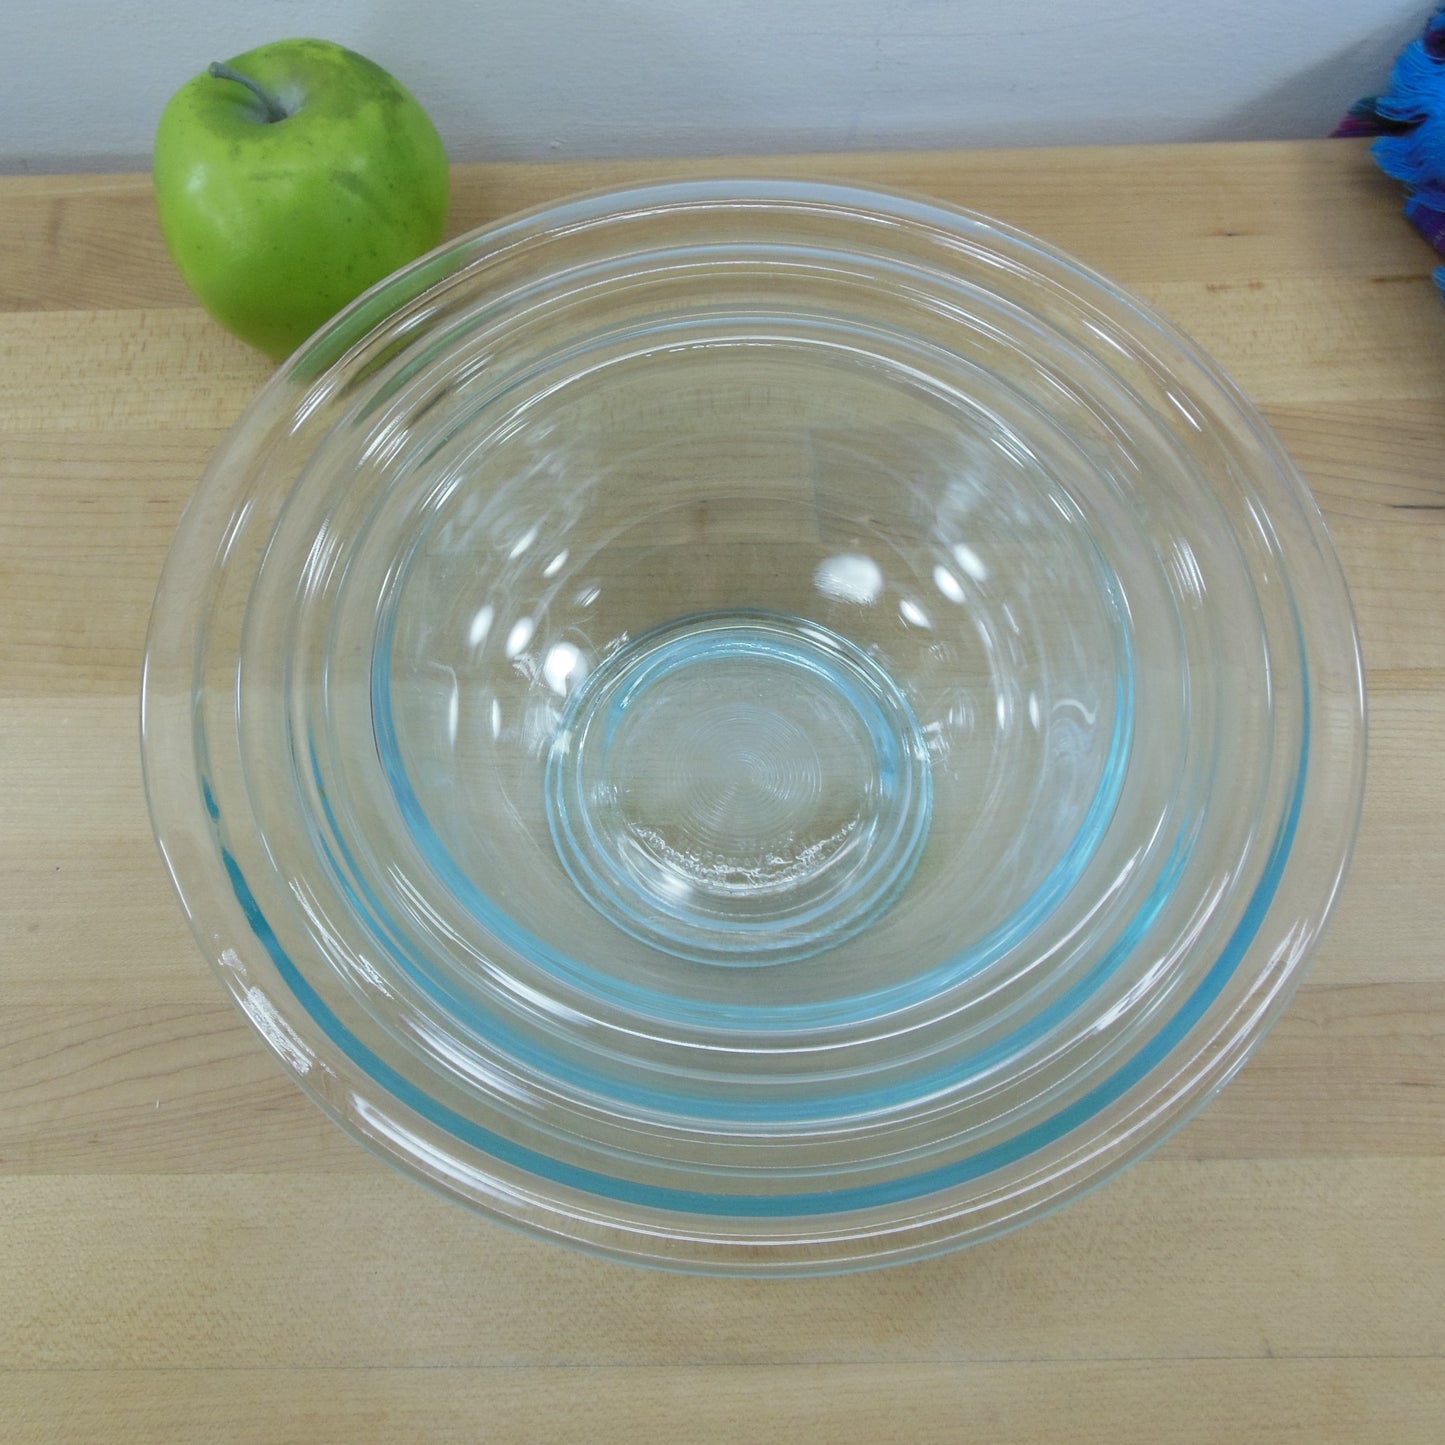 Set of 3 Pyrex clear glass nesting mixing bowls with lids